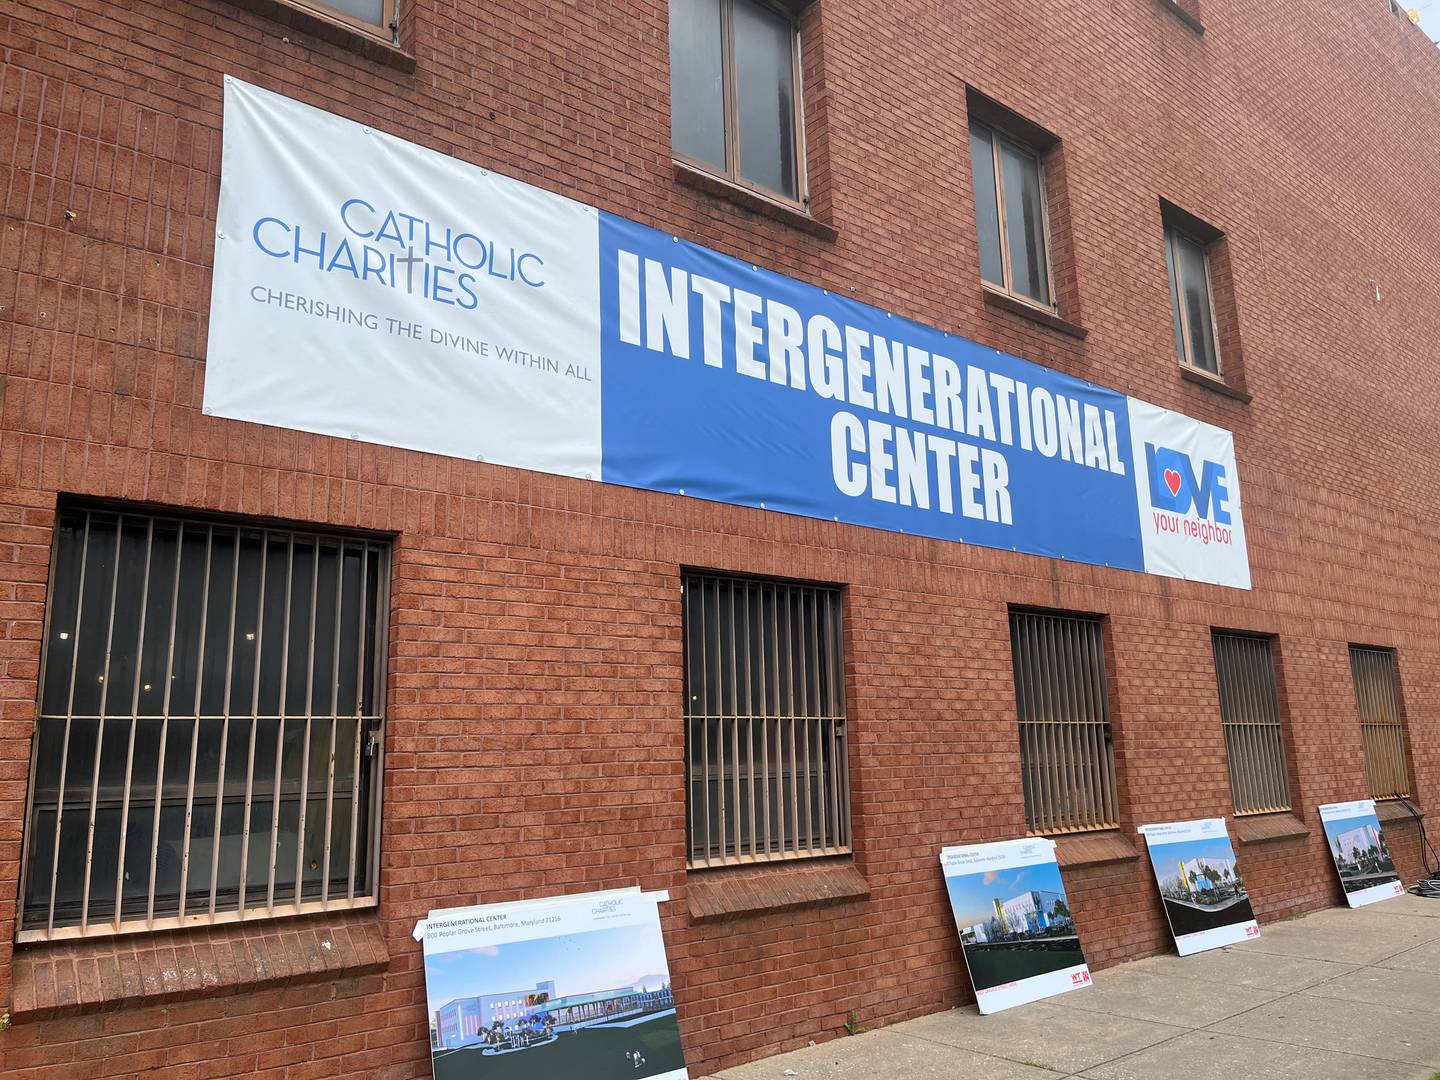 Catholic Charities is opening an Intergenerational Center in West Baltimore.